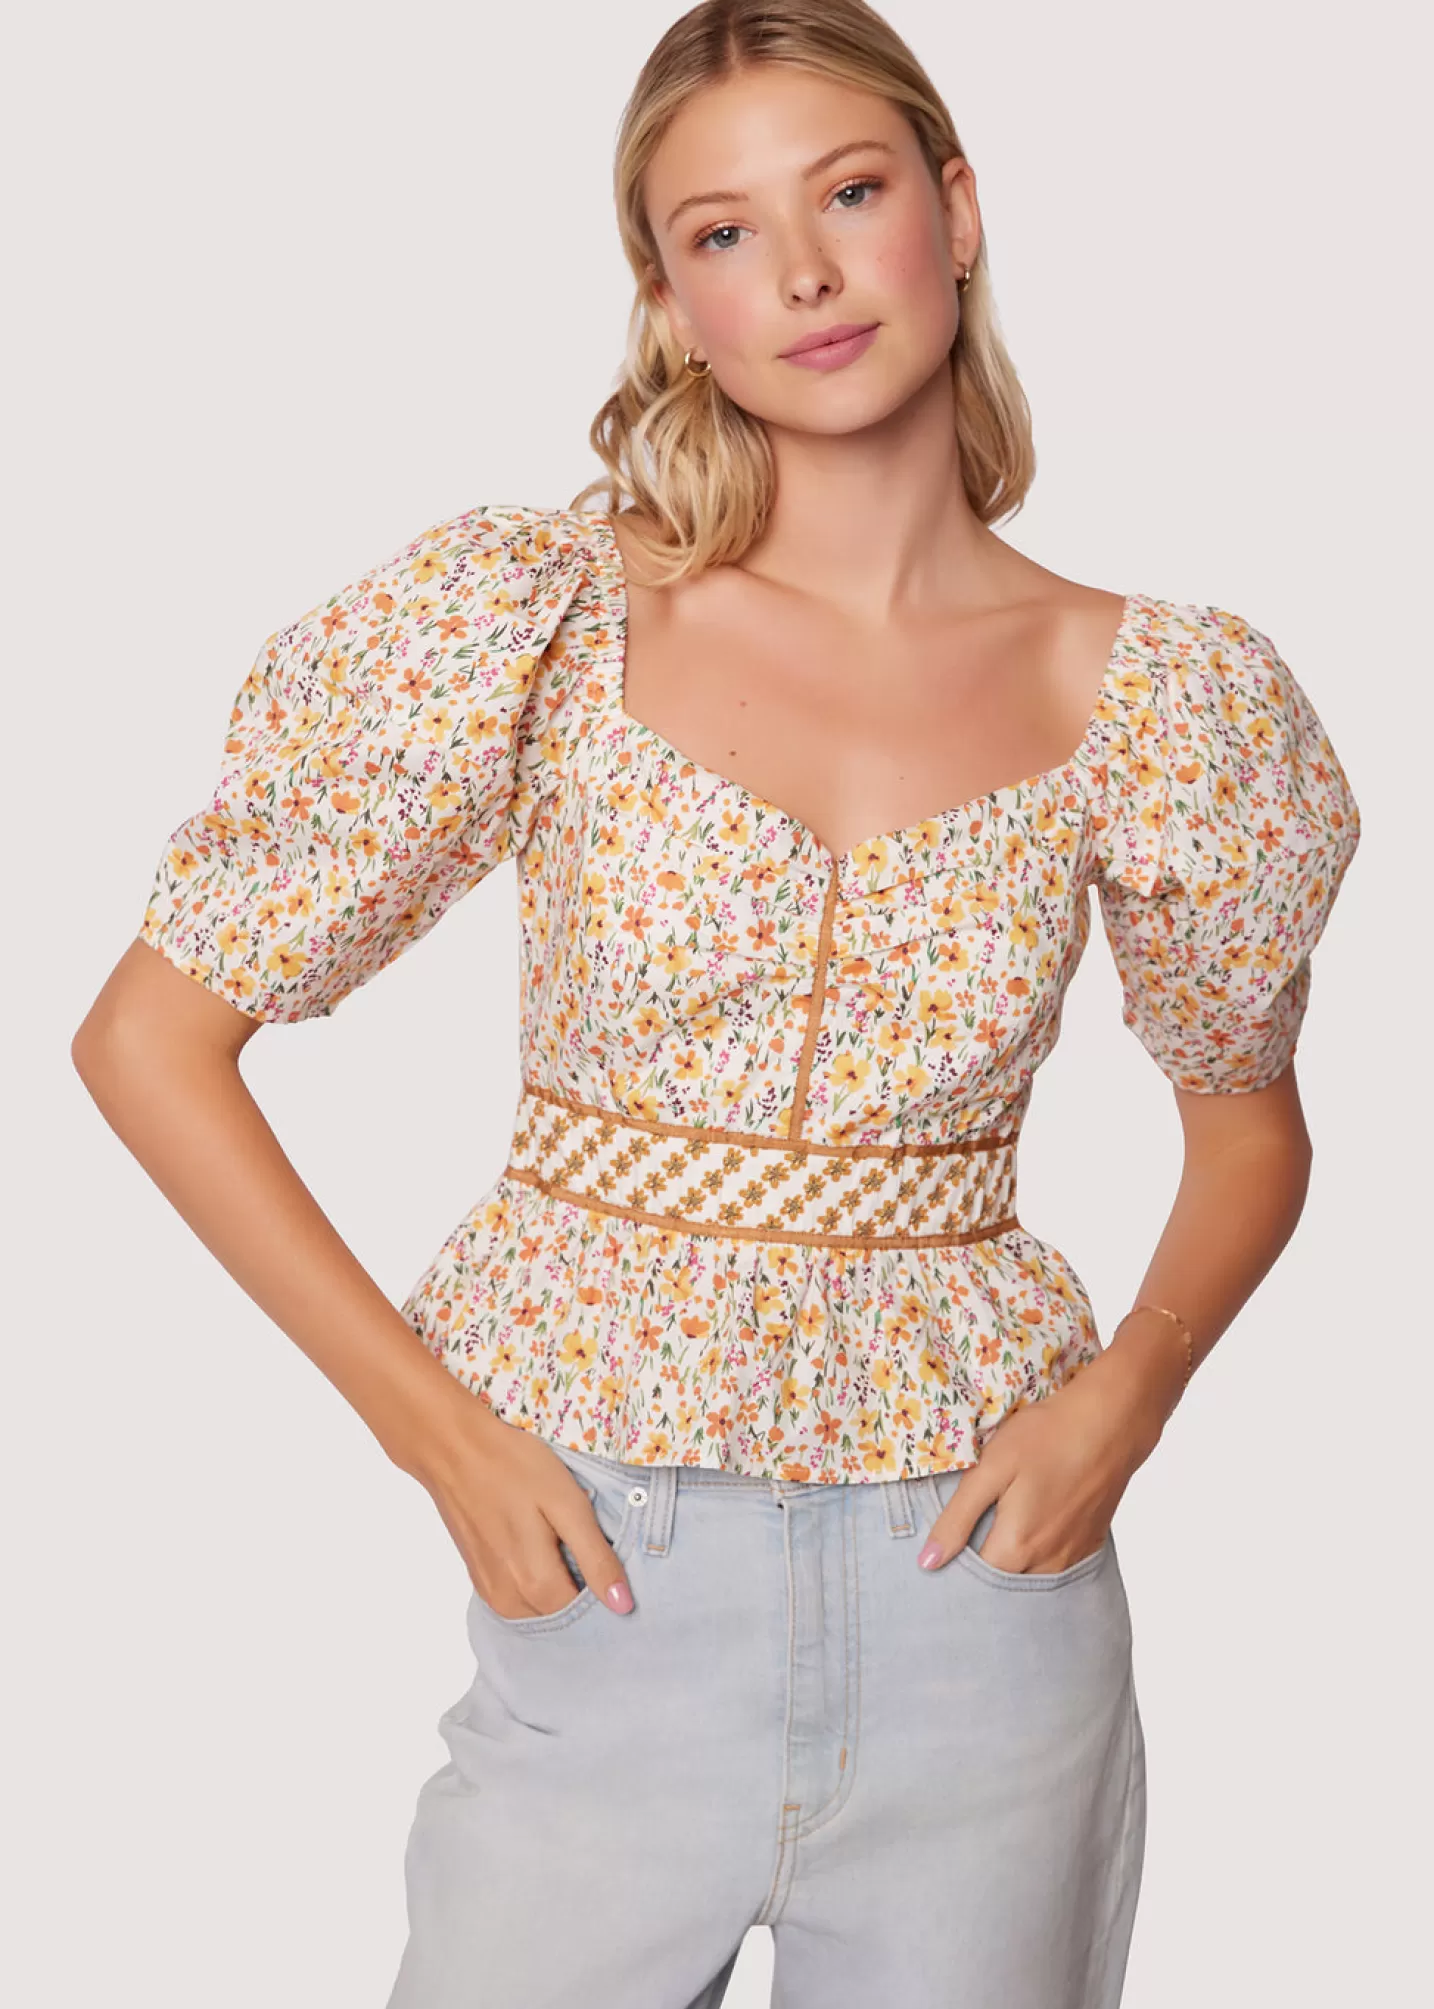 Lost + Wander Sets*Spring Sunrise Top YELLOW-MULTI-FLORAL